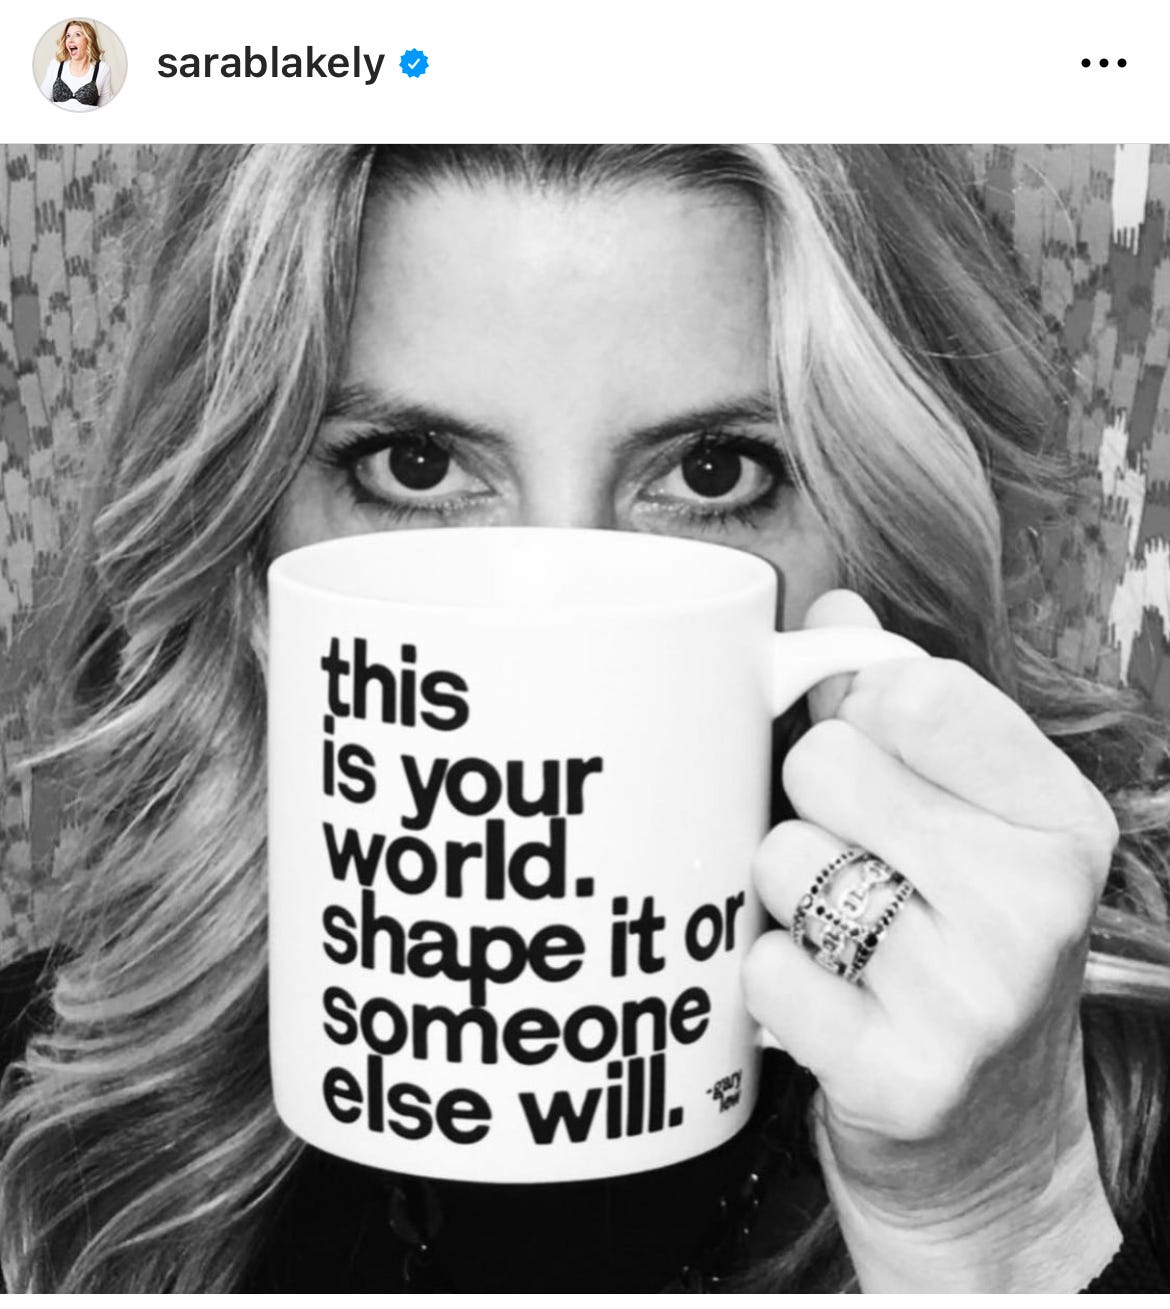 Sara Blakely's post "this is your world. shape it or someone else will.